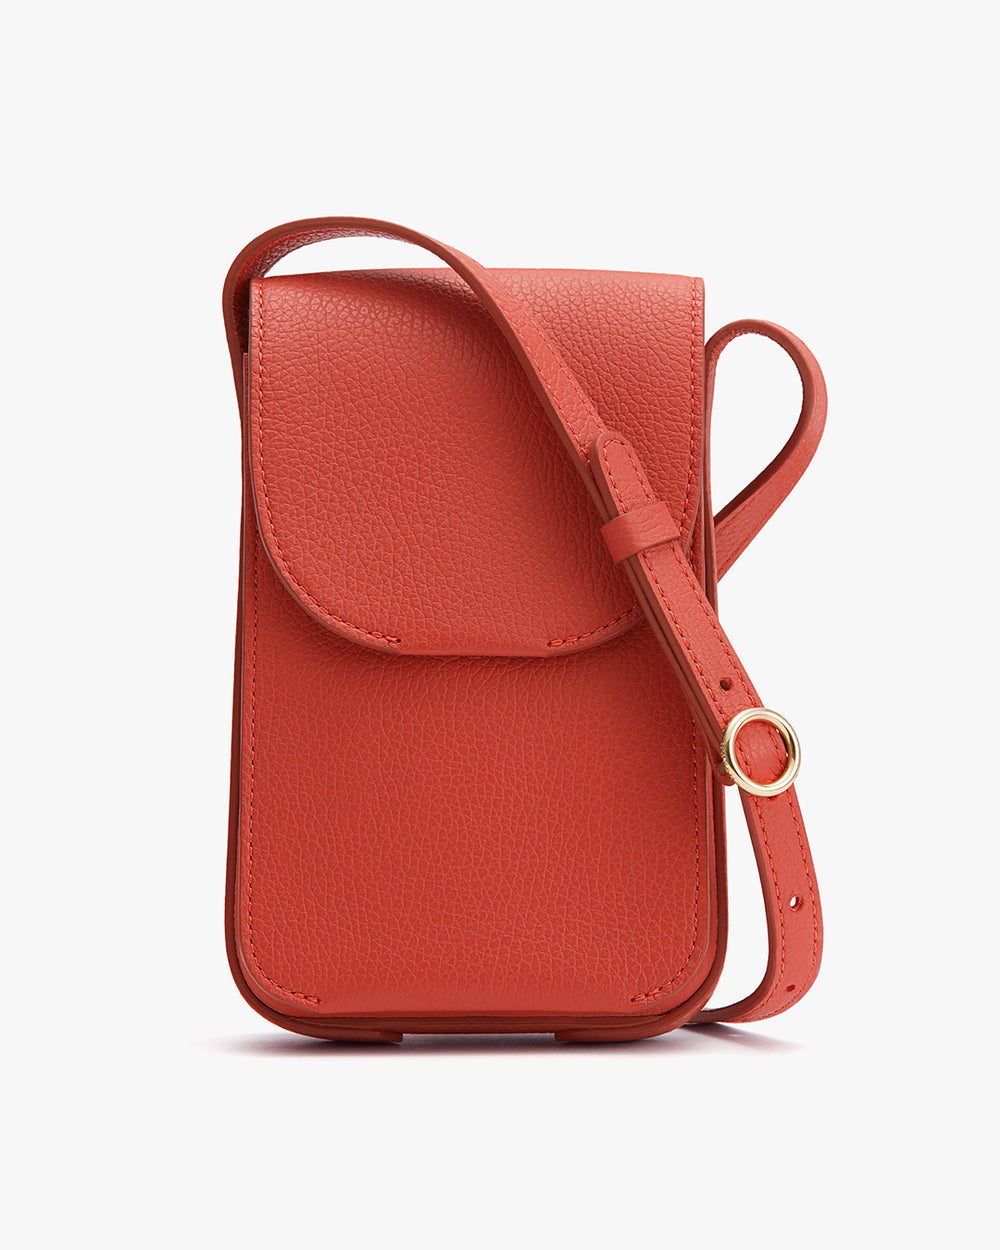 A small textured shoulder bag with a flap and adjustable strap.